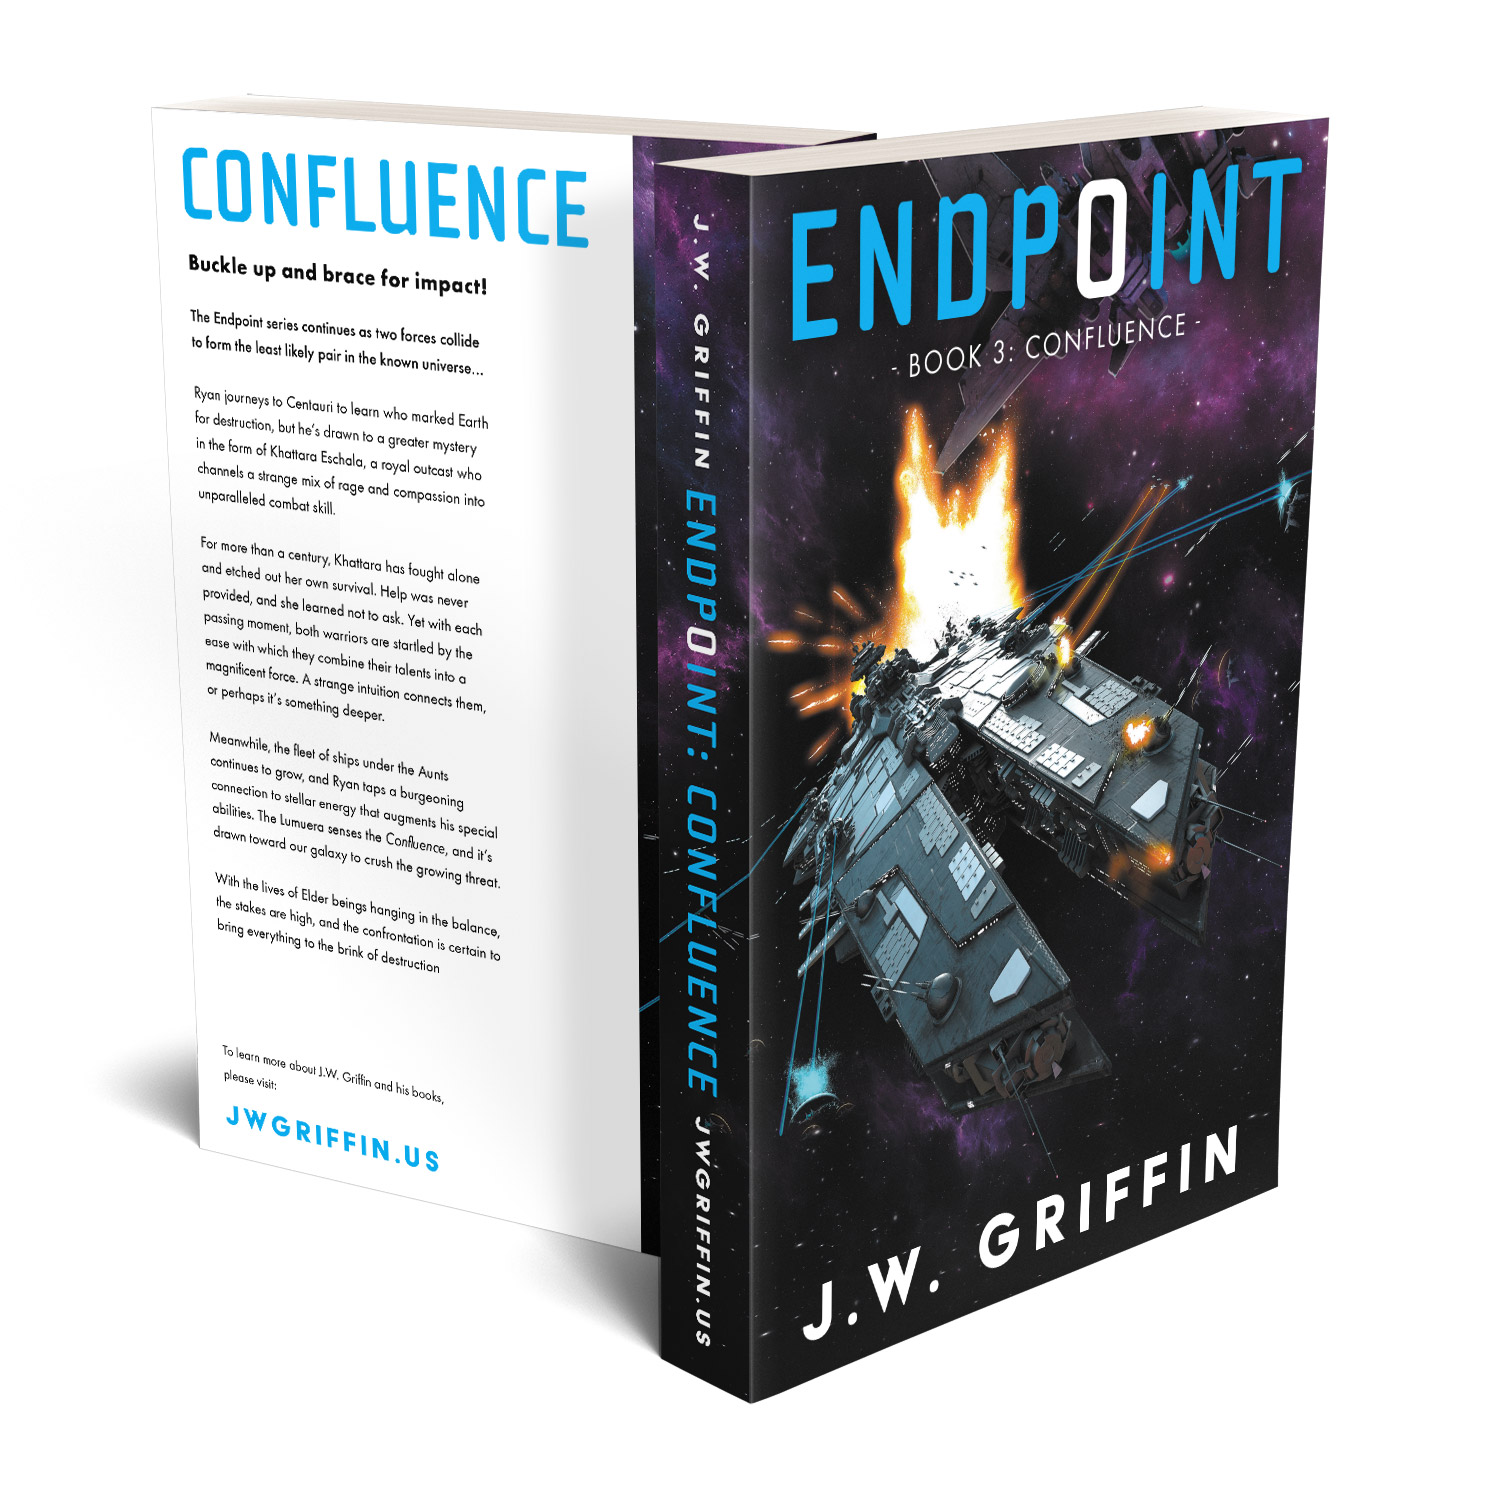 The Endpoint Series is a fantastic character-led hard sci-fi series. The author is JW Griffin. The book cover designs and interior formatting are by Mark Thomas. To learn more about what Mark could do for your book, please visit coverness.com.